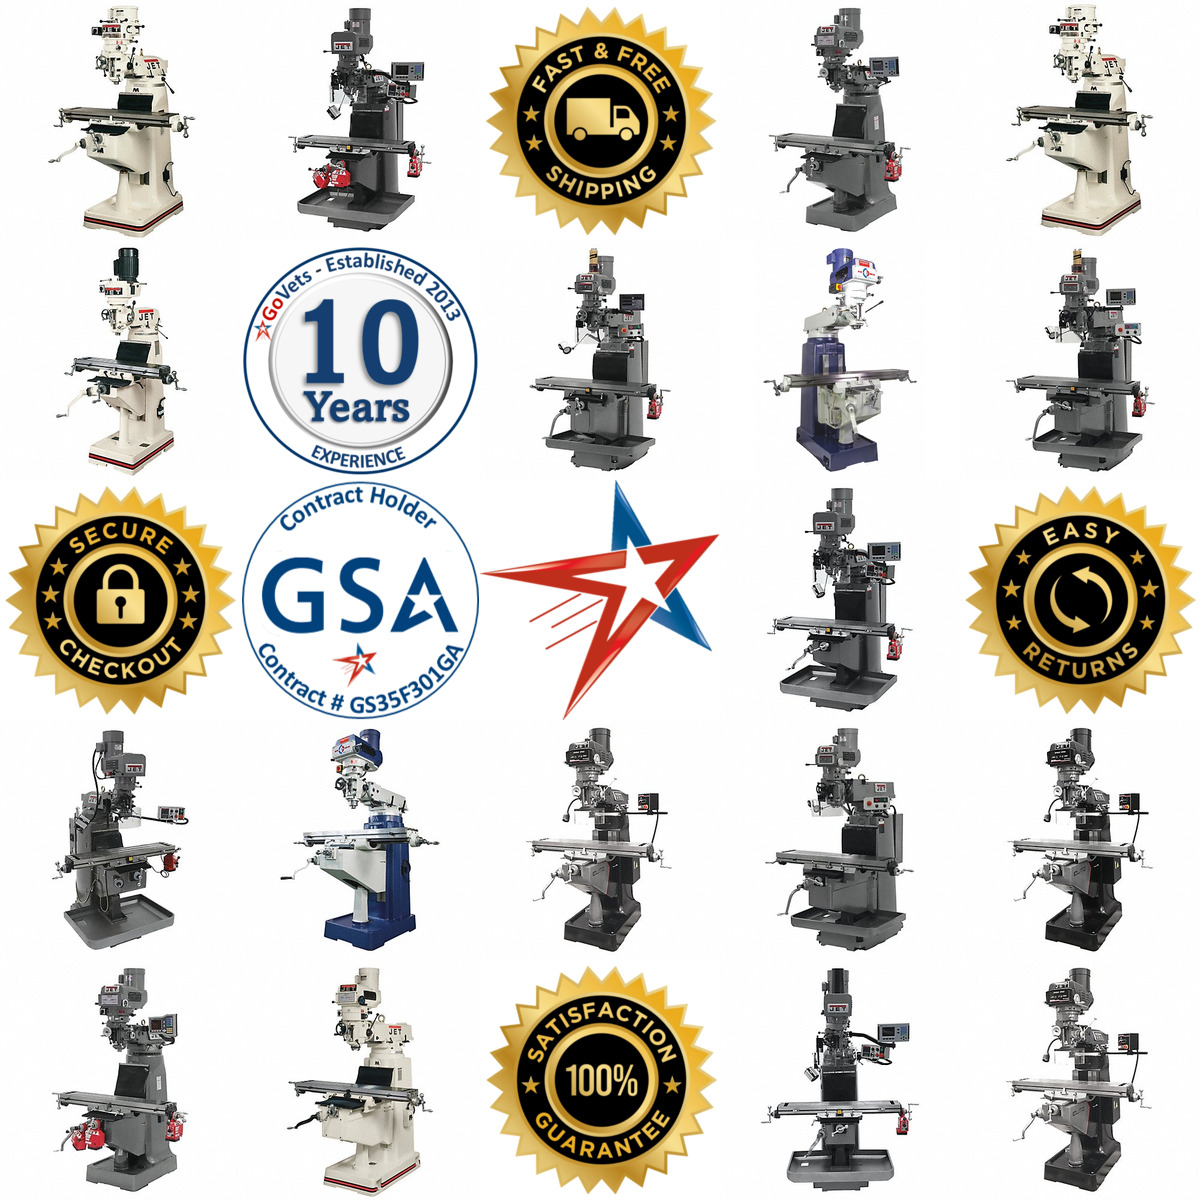 A selection of Knee and Column Milling Machines products on GoVets